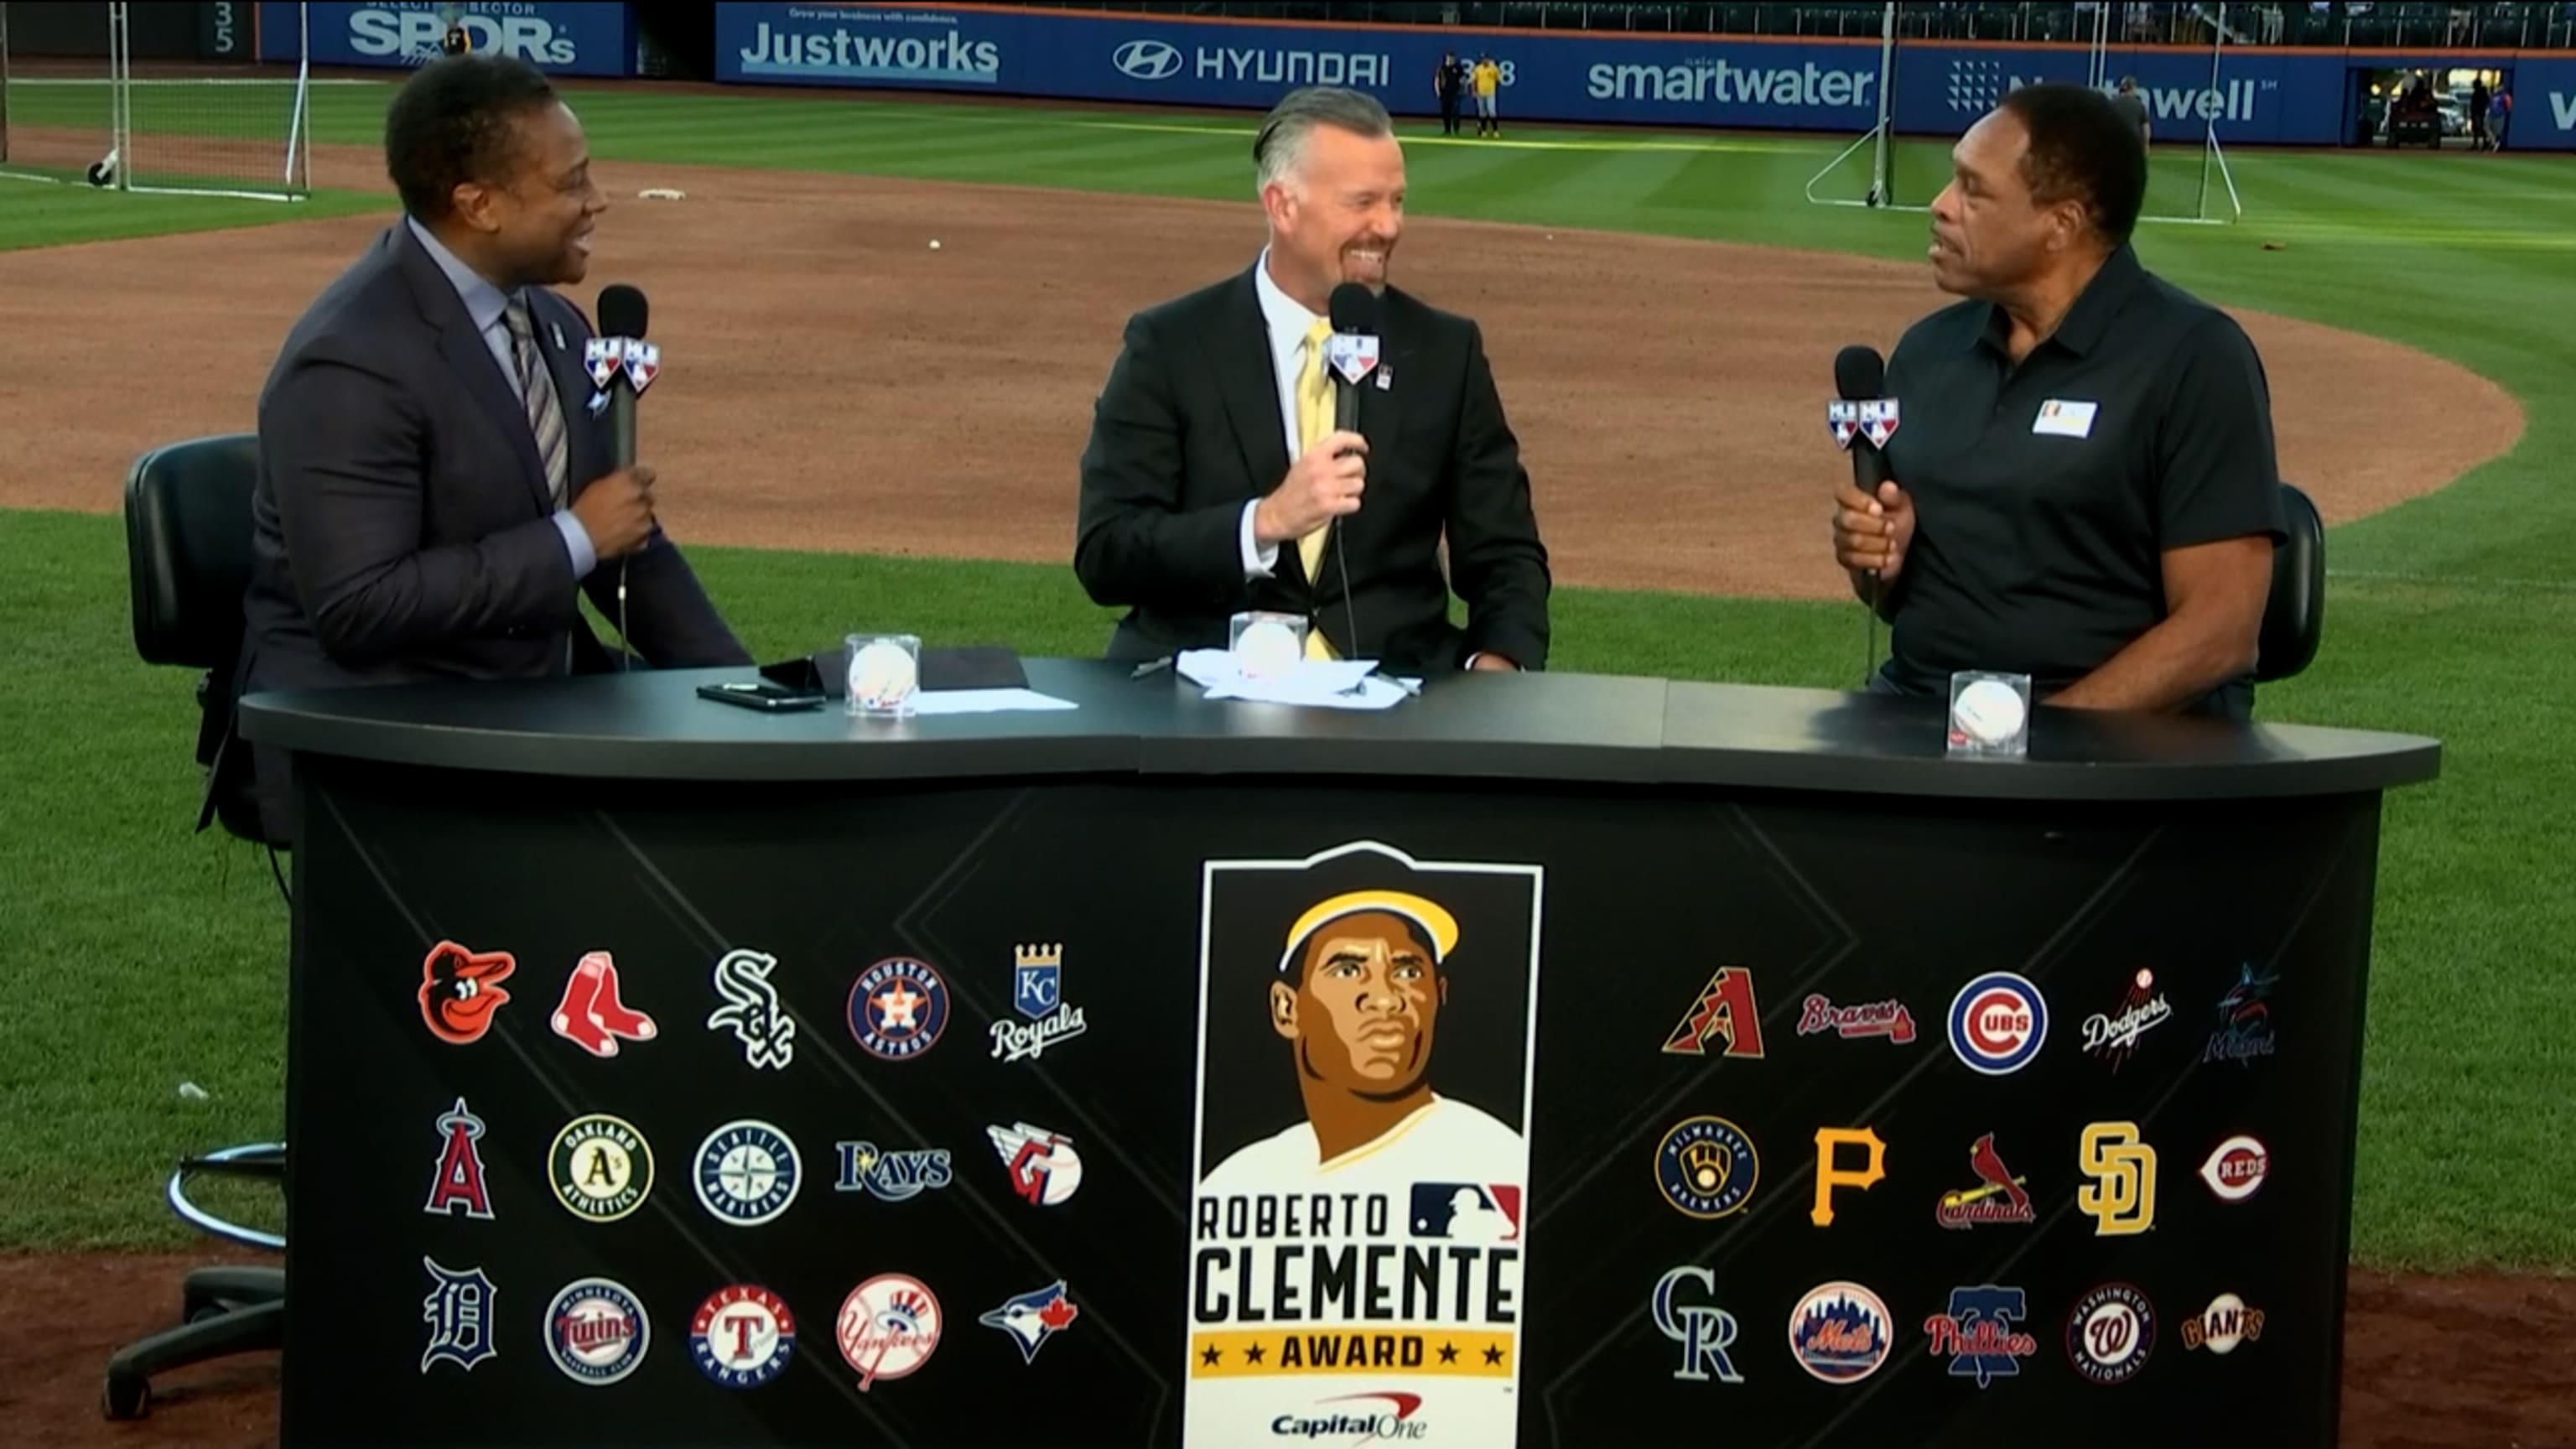 MLB® The Show™ - Roberto Clemente Day Honors “Arriba” for his Performance  On & Off the Field